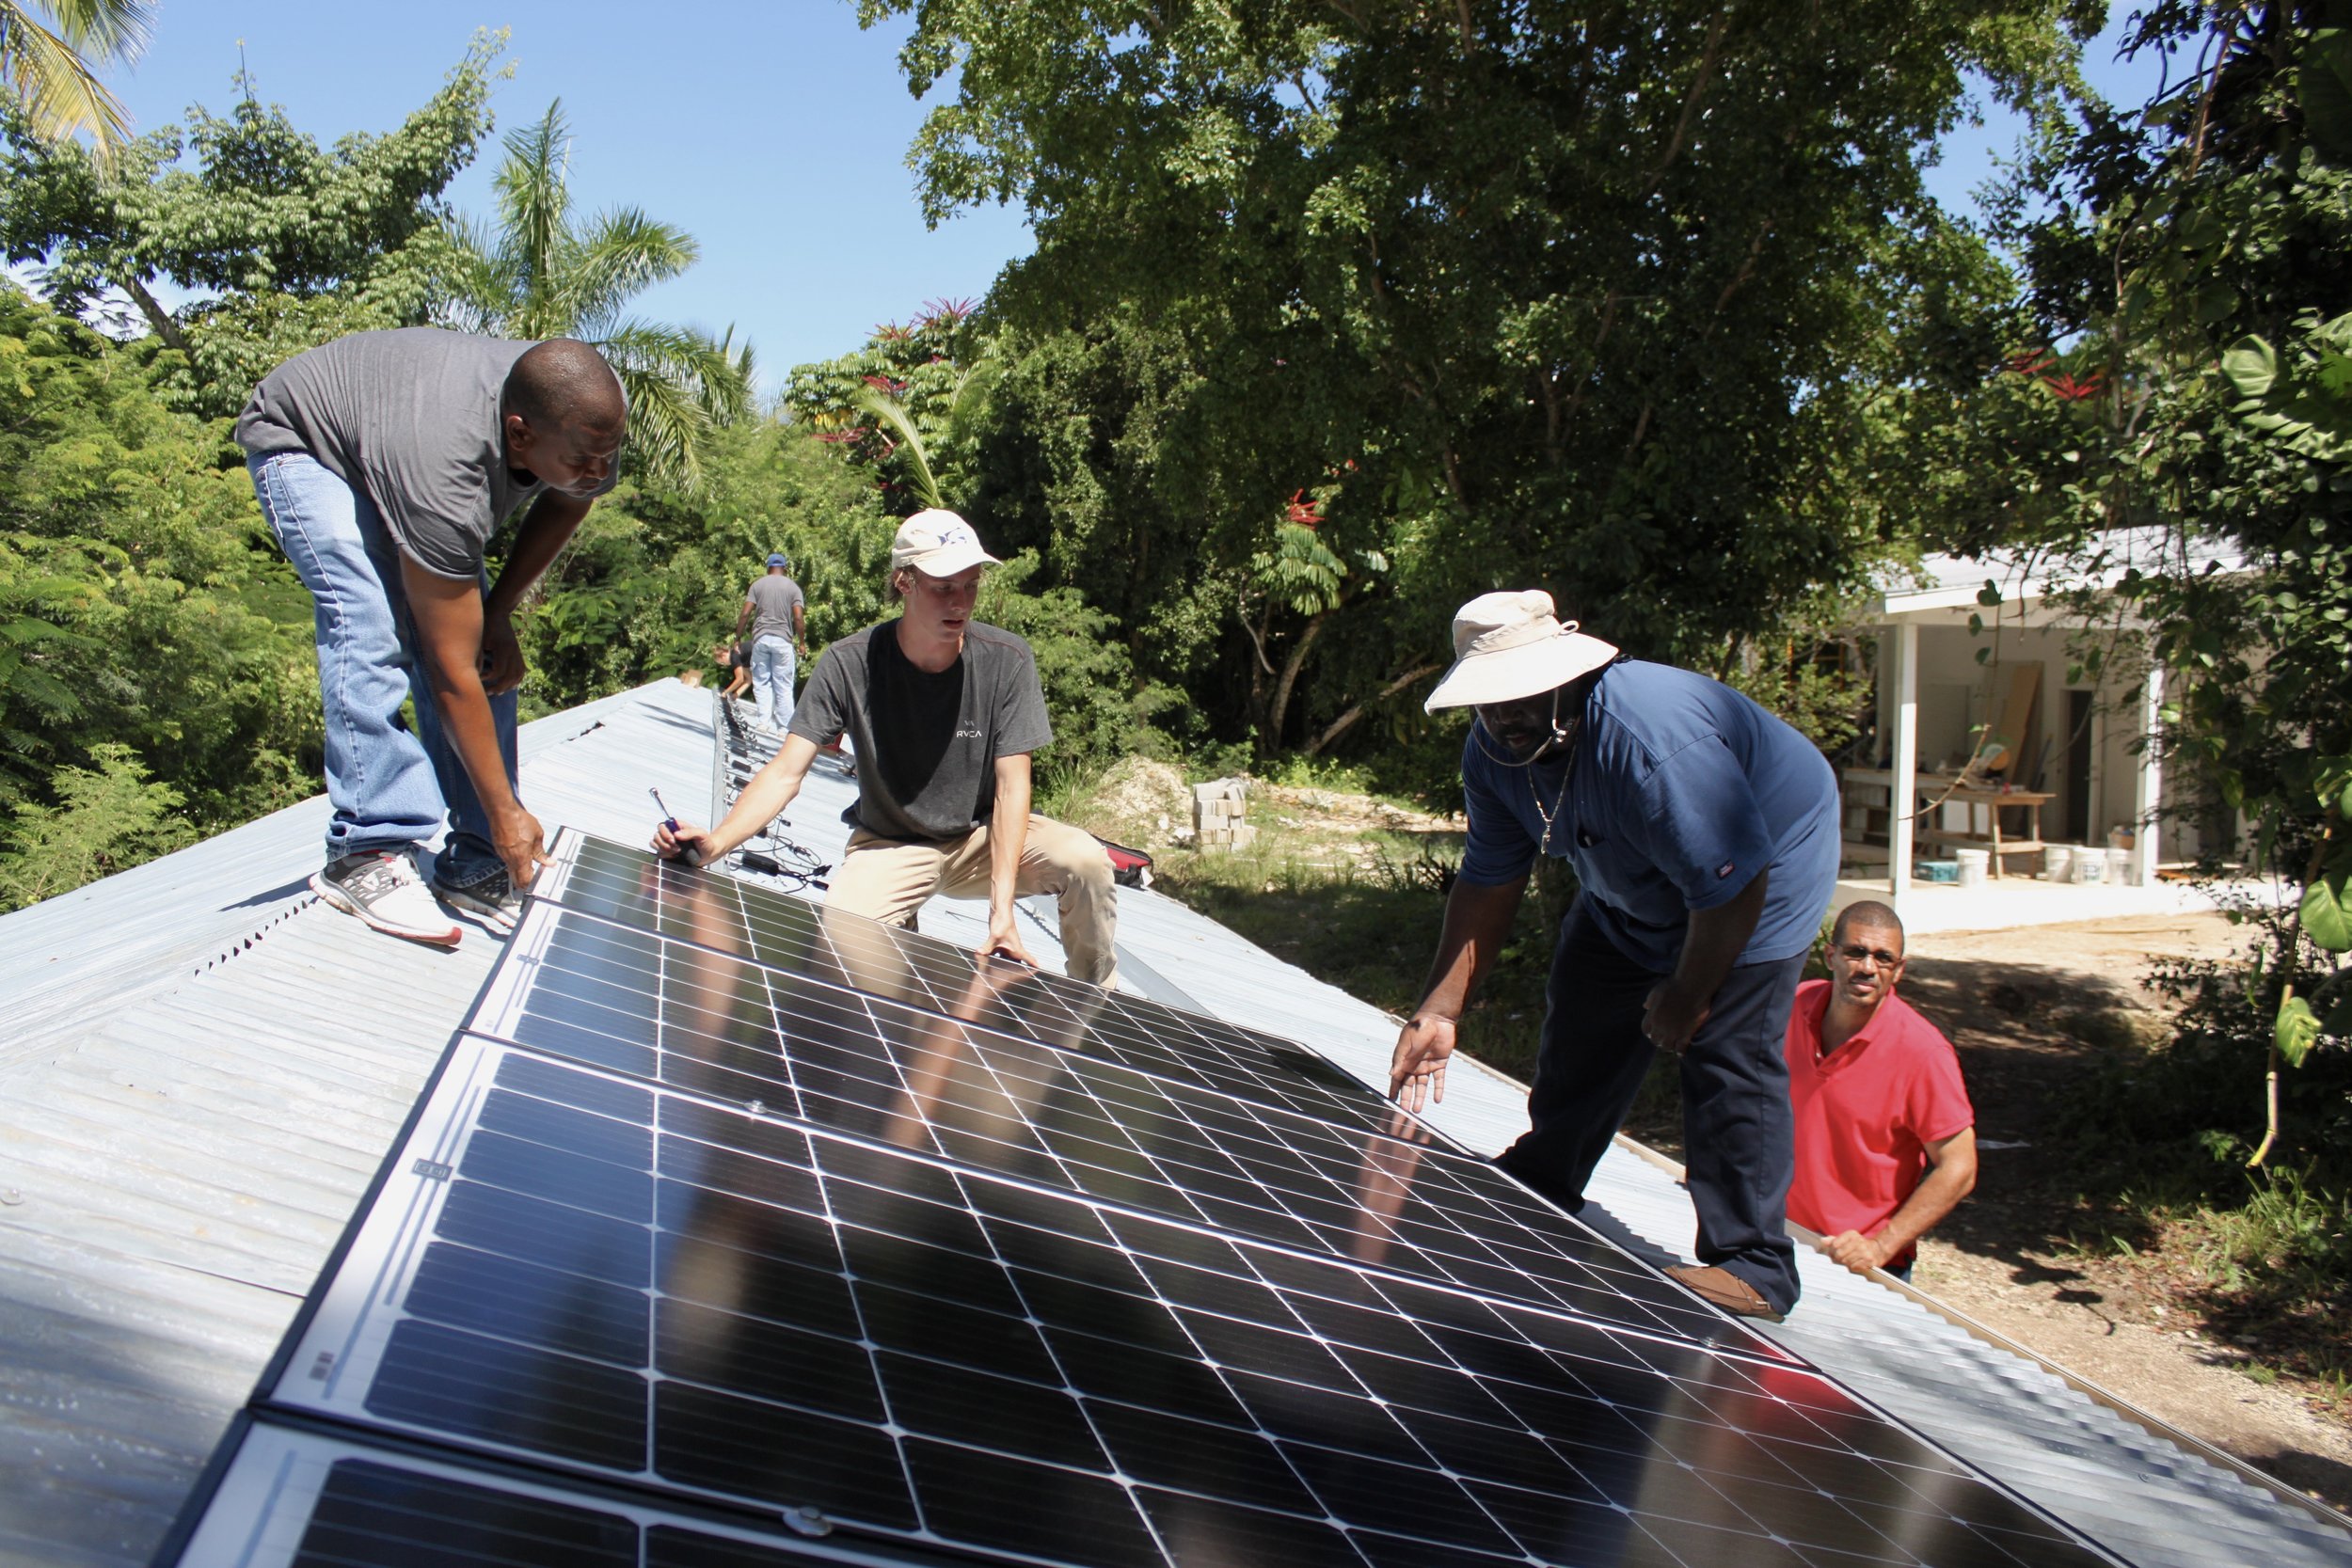 Michael, one of our general systems interns and two participants work to install the solar modules along the roof.